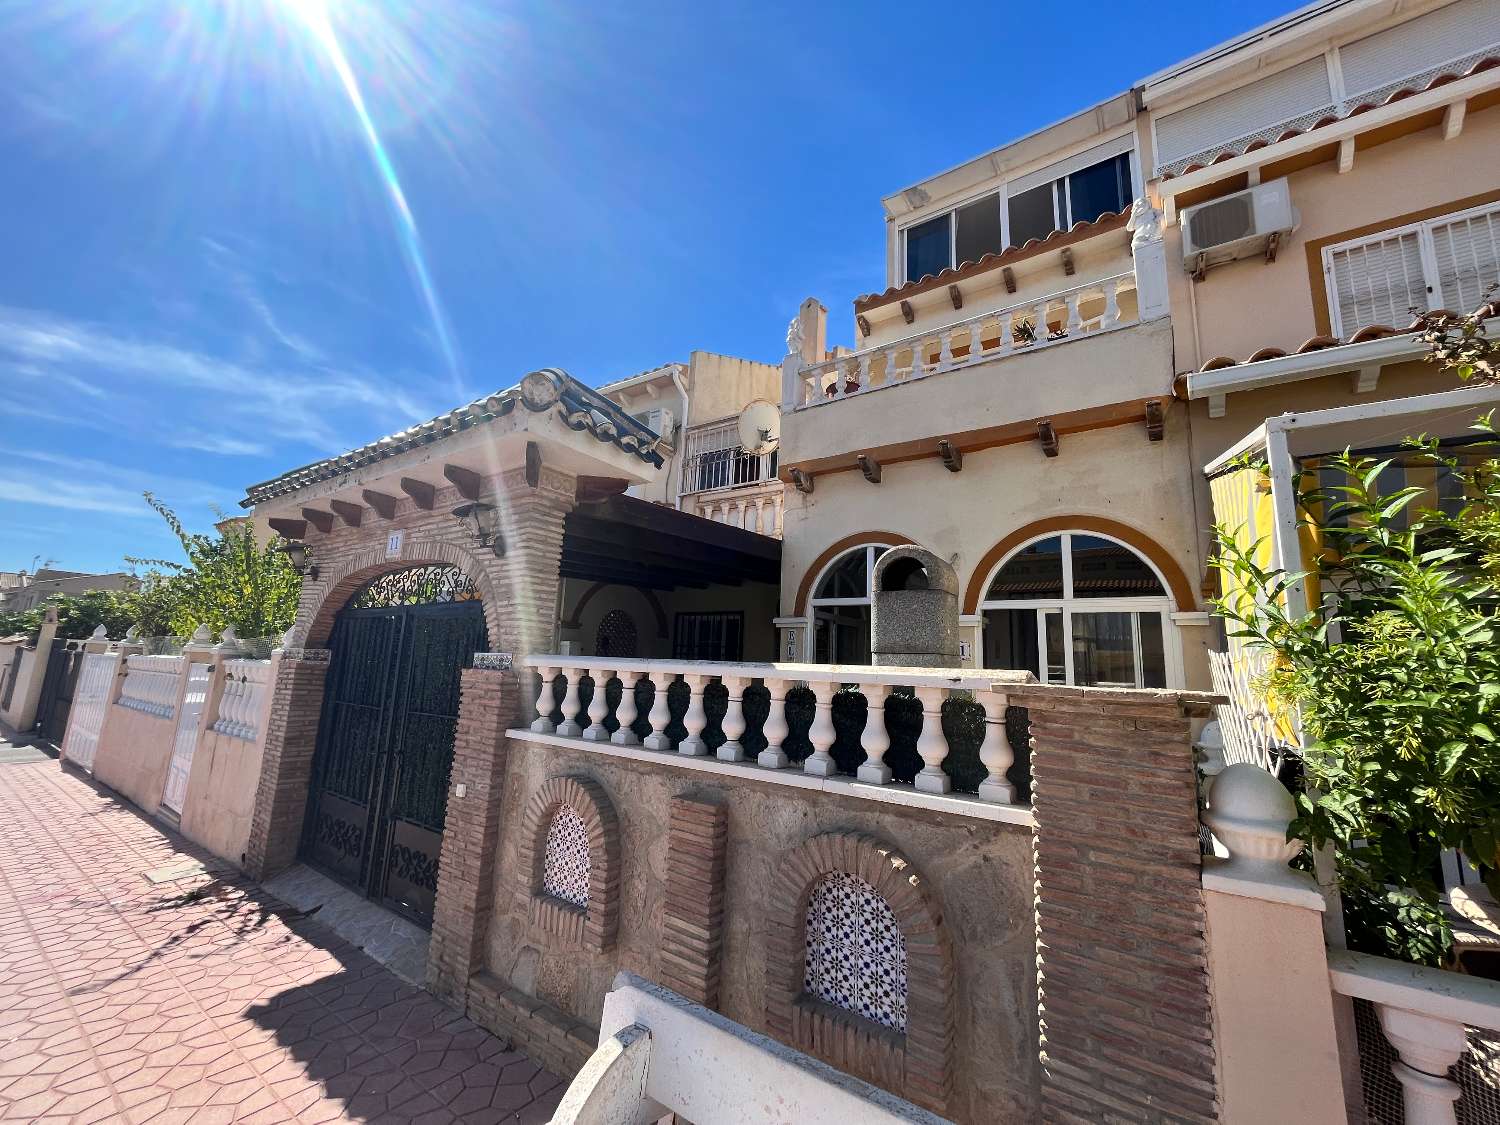 Great duplex with 3 bedrooms, 2 bathrooms located in the center of Playa Flamenca